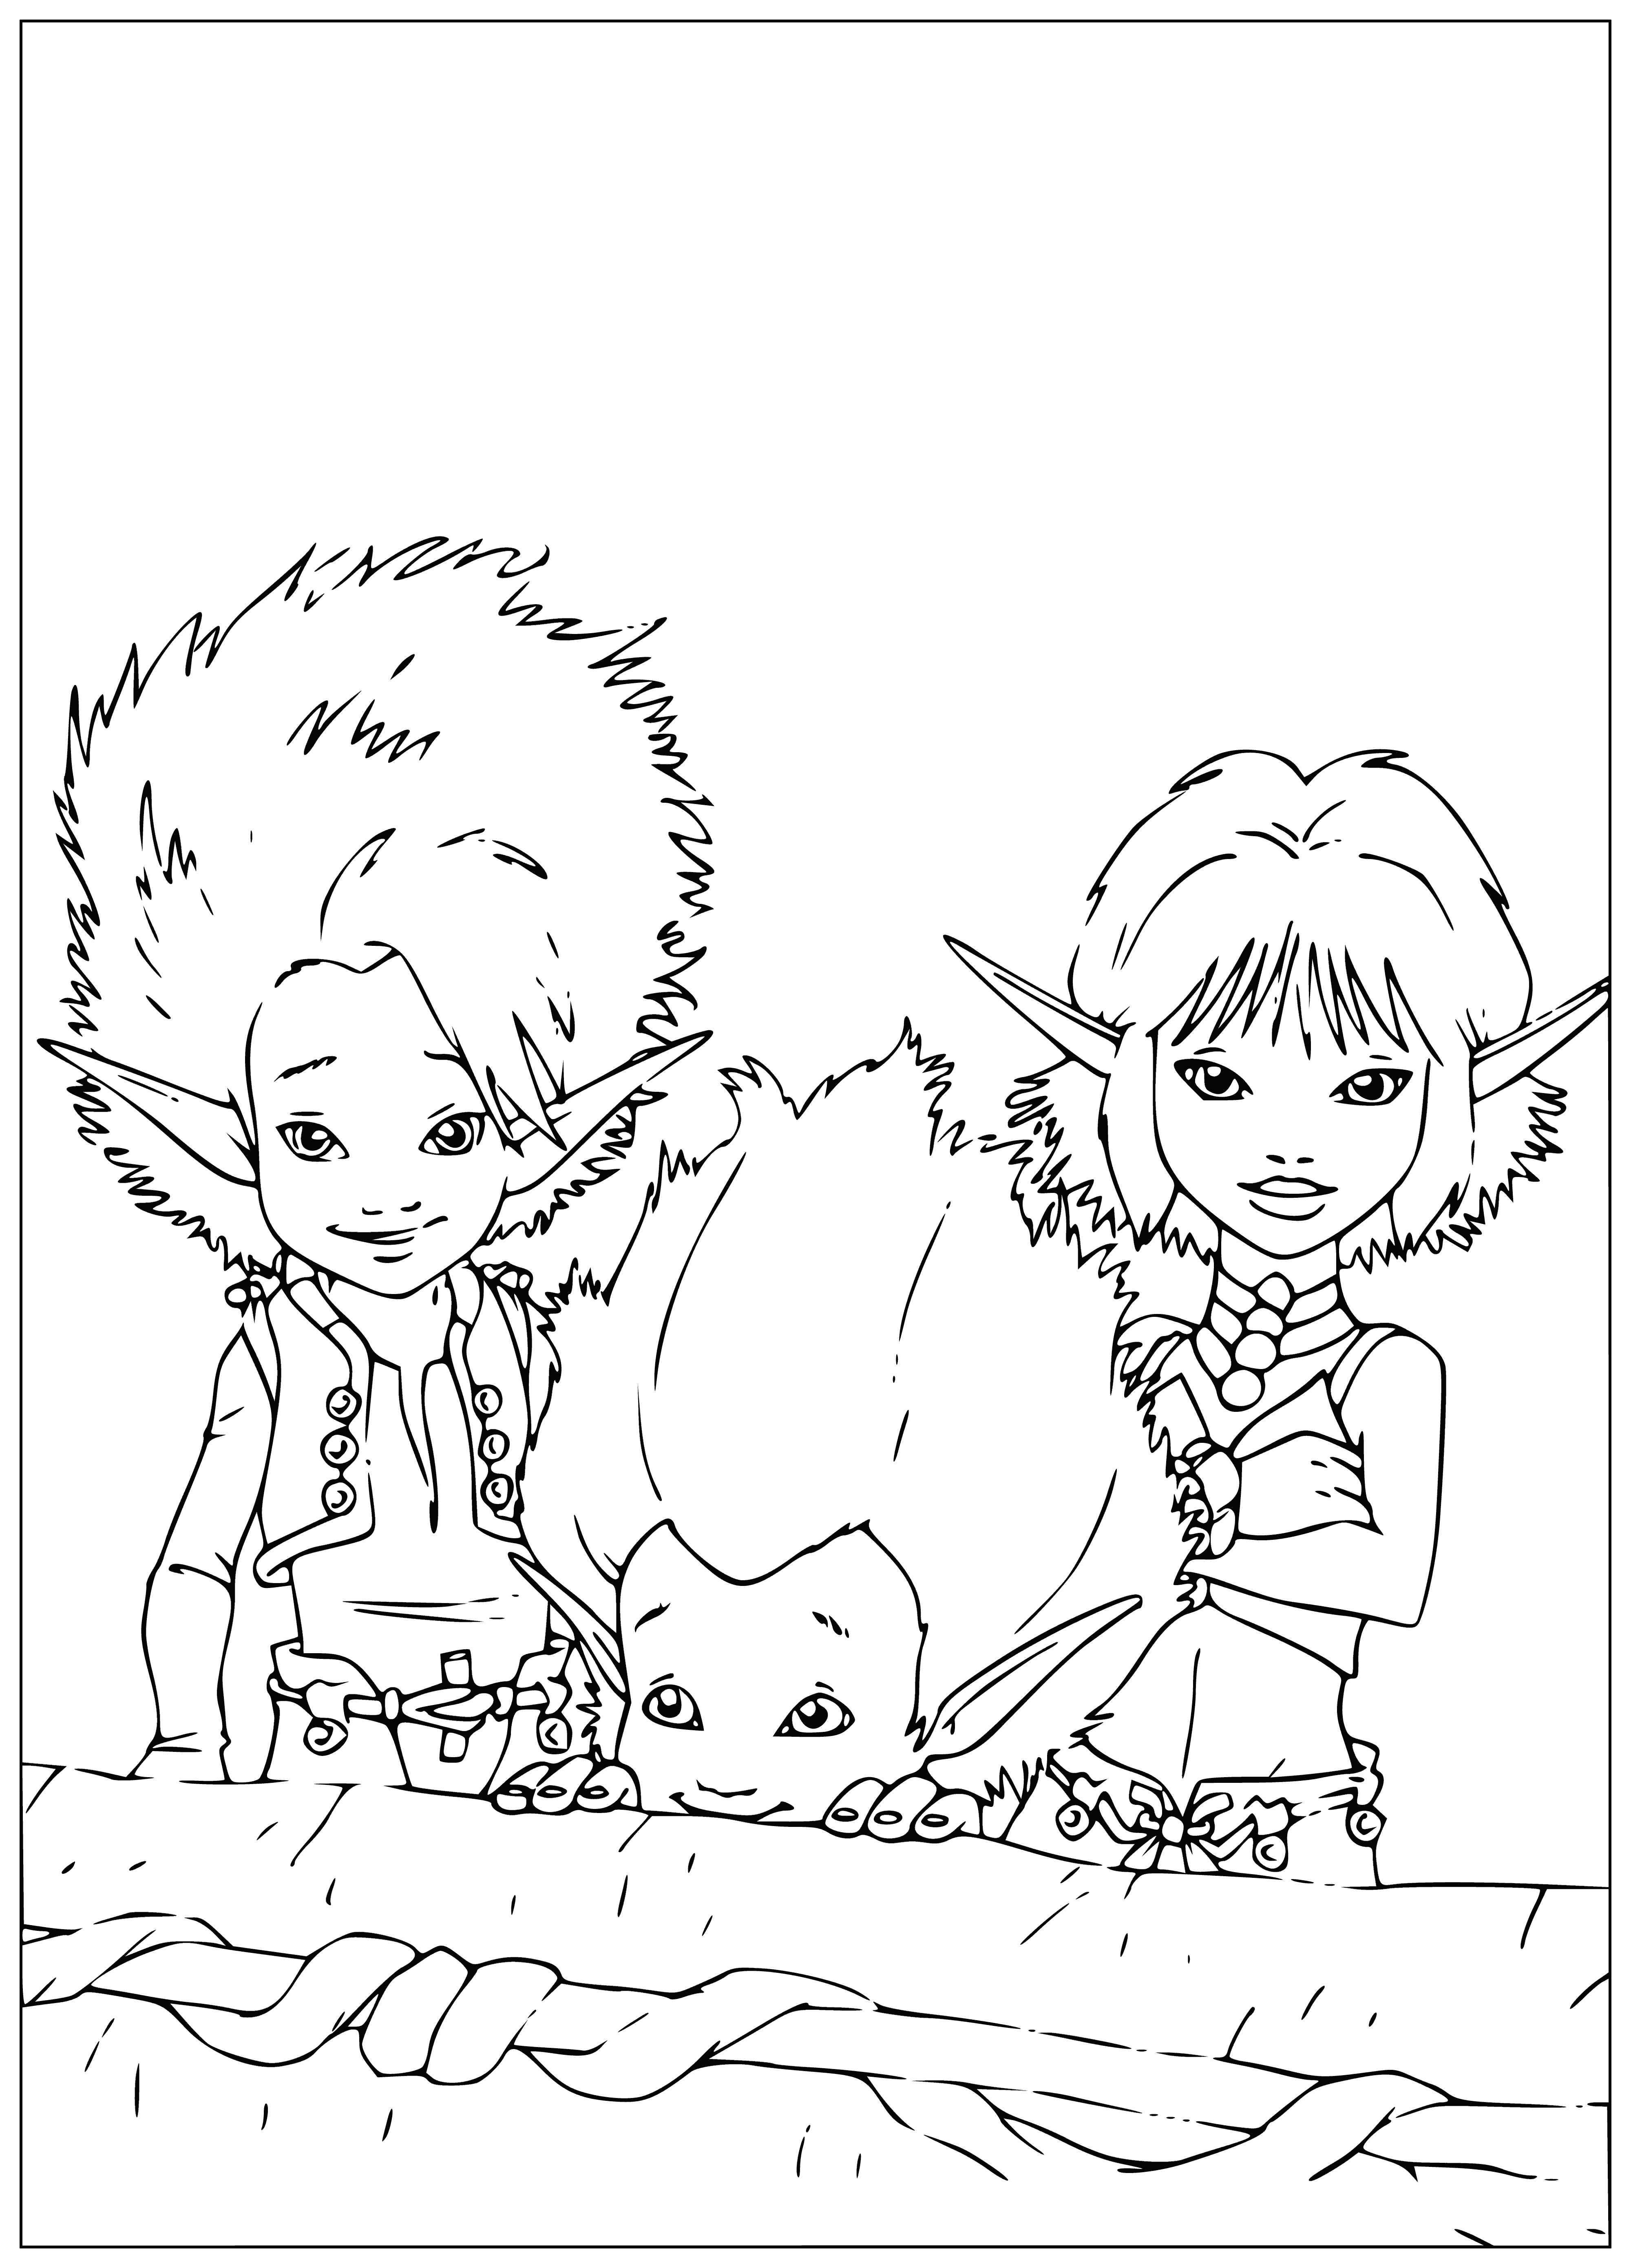 coloring page: Boy reaching out, girl looking on, brown creature smiling in the background: a heartwarming scene. #family #love